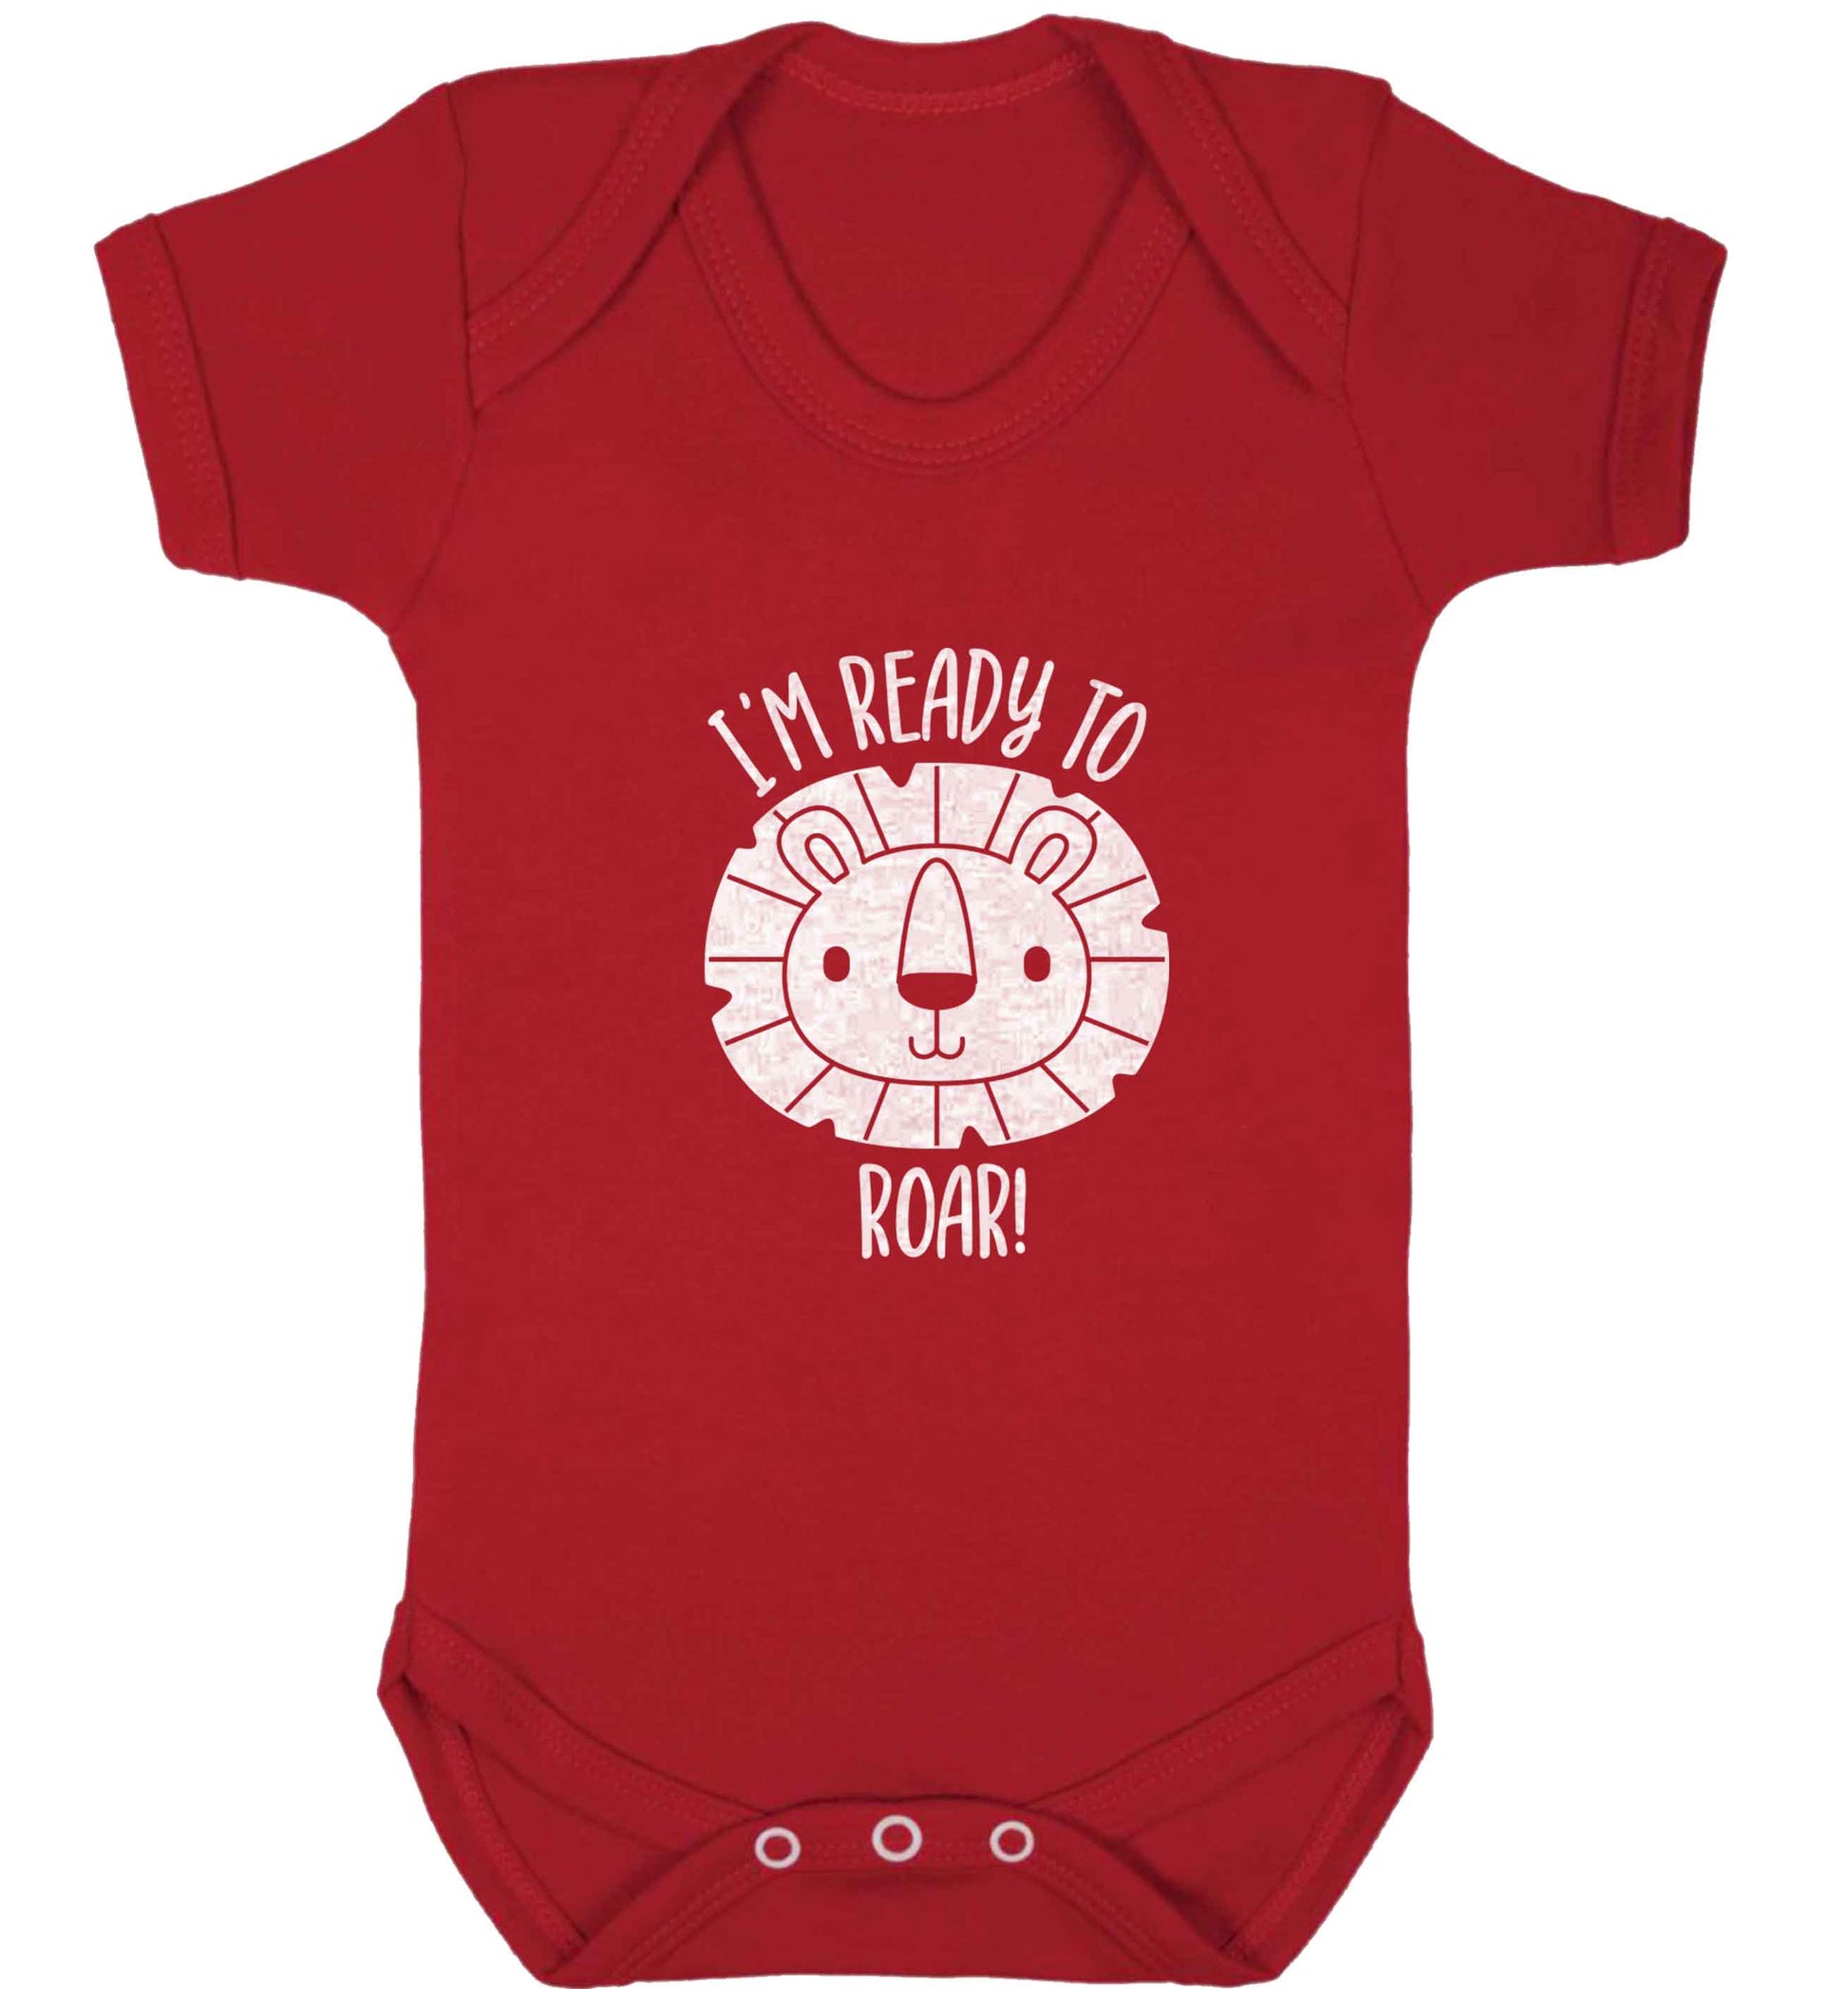 I'm ready to rawr baby vest red 18-24 months